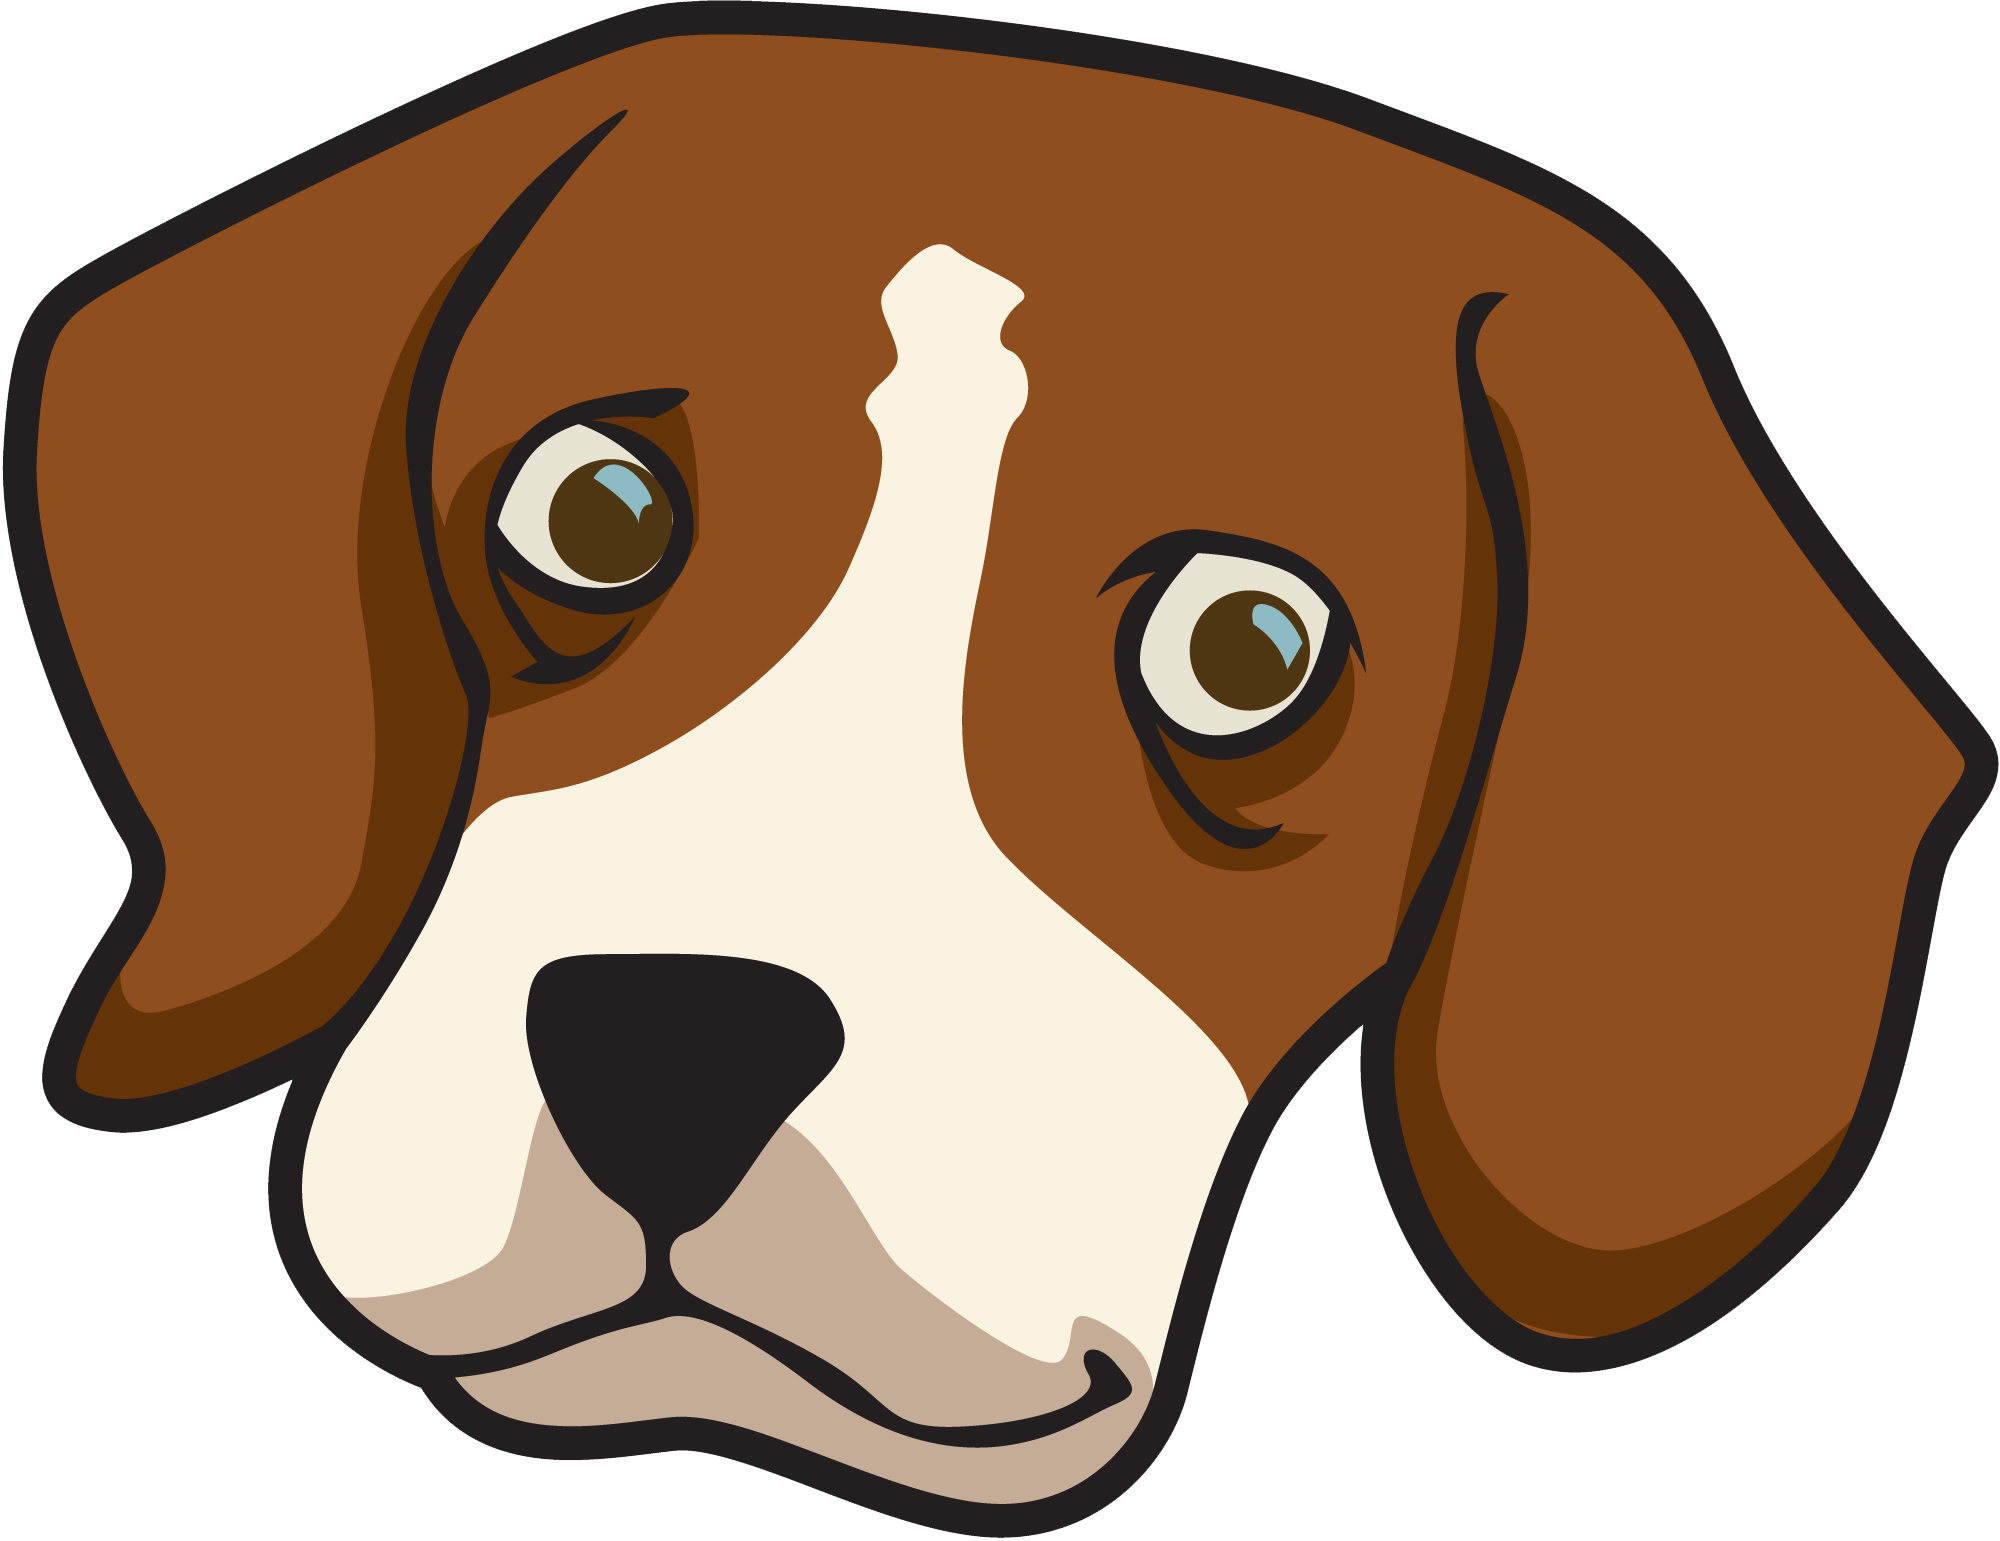 Puppy Dog Face Download HQ PNG Image